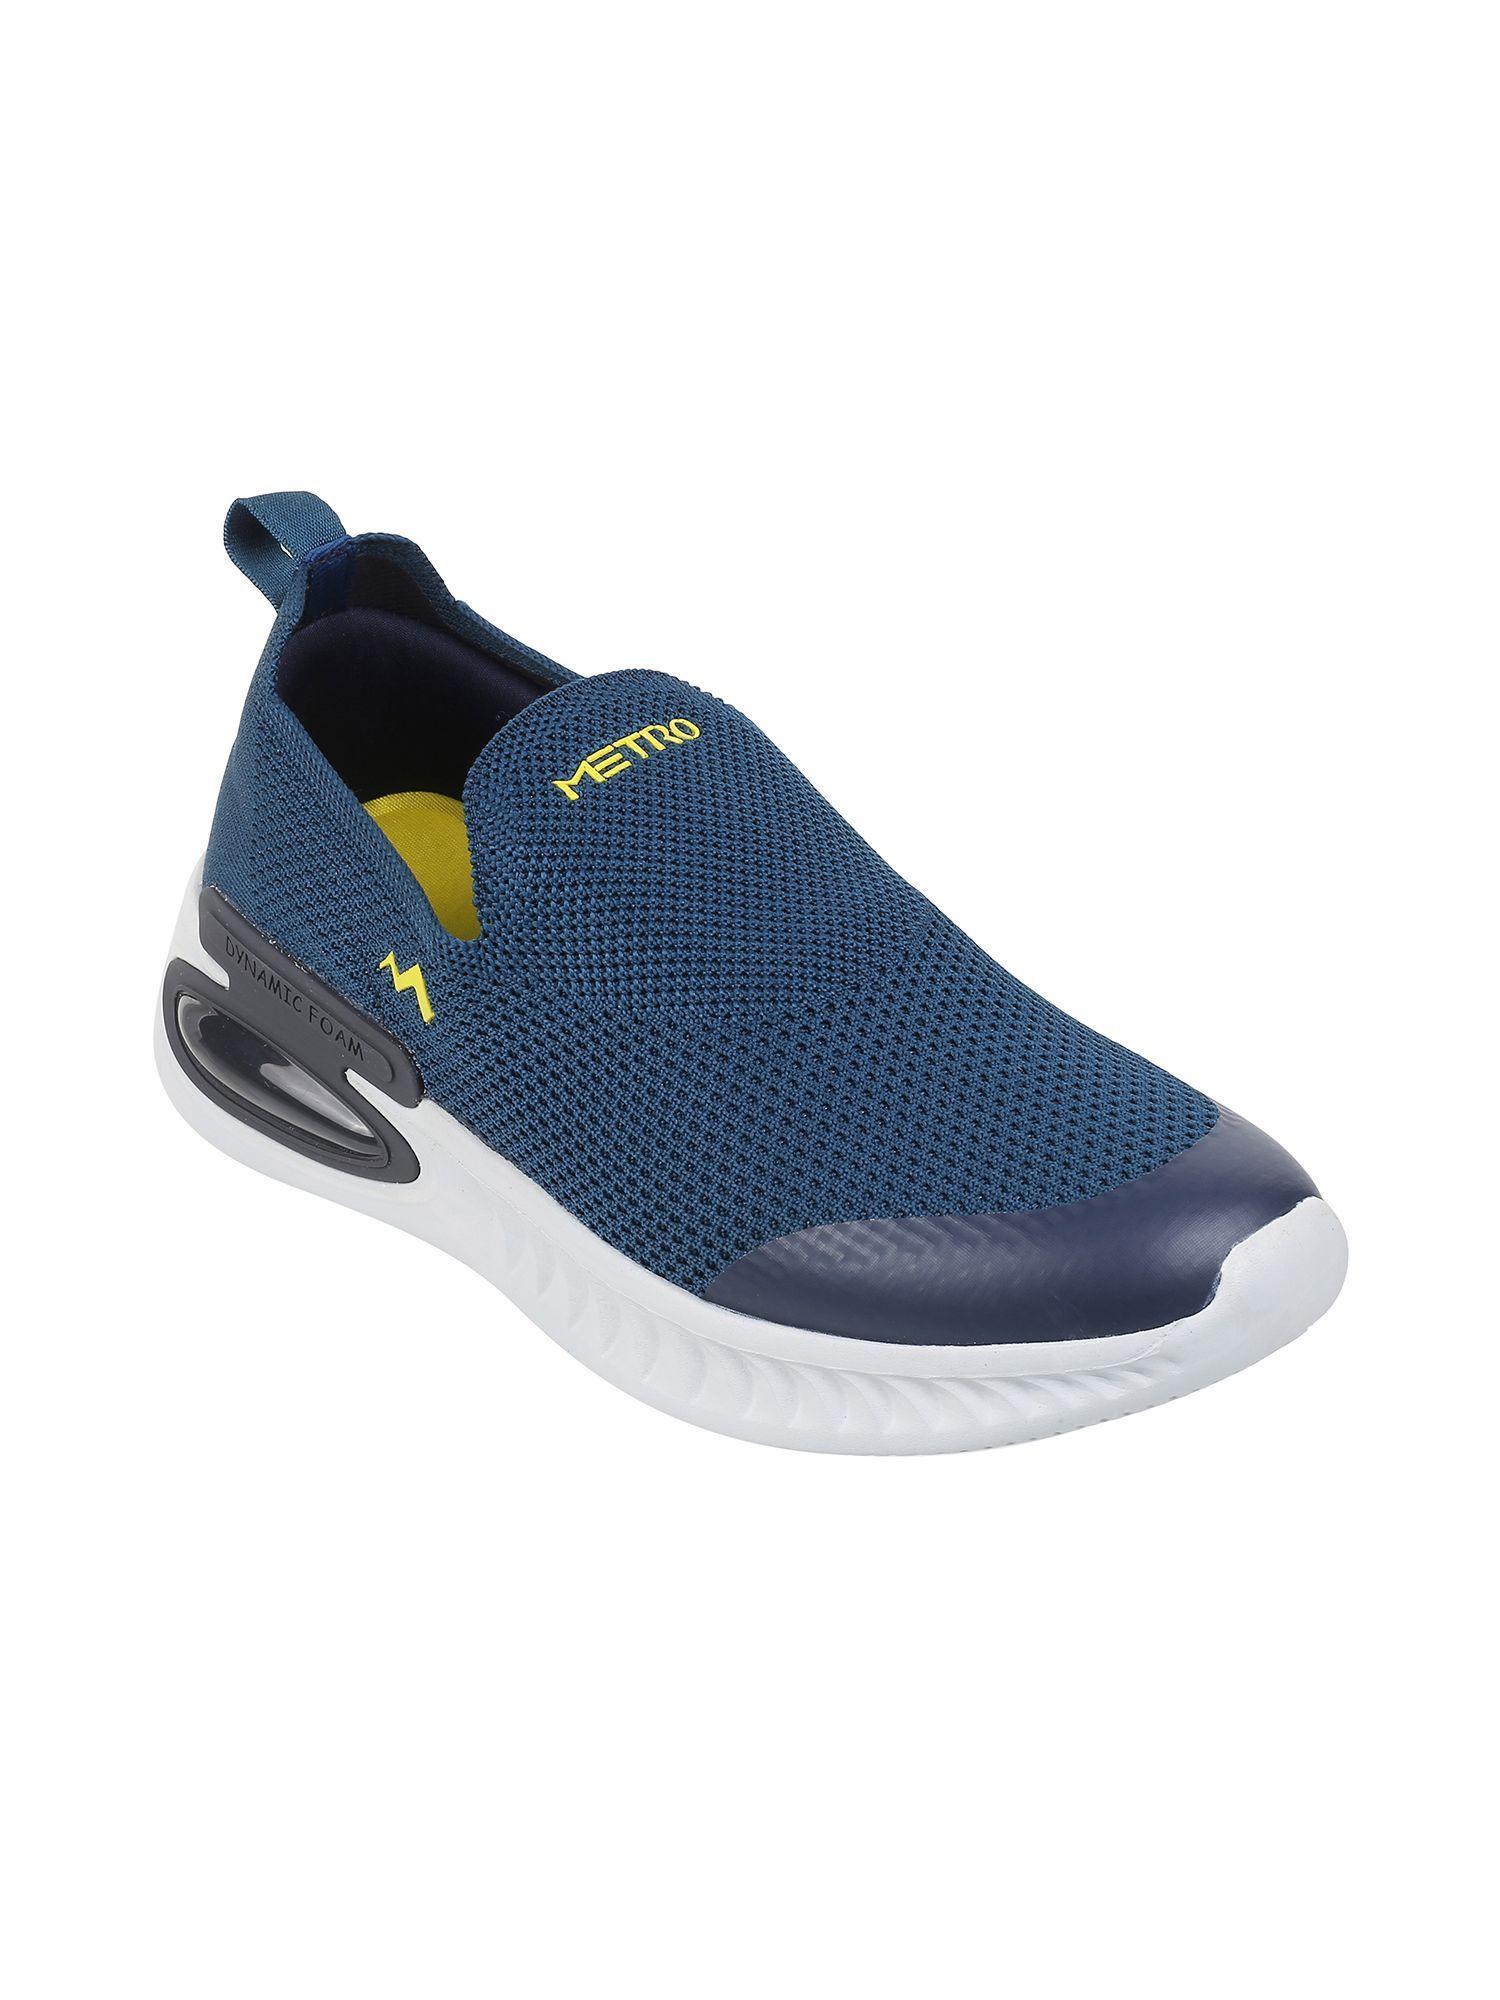 men-sports-synthetic-navy-blue-walking-shoes